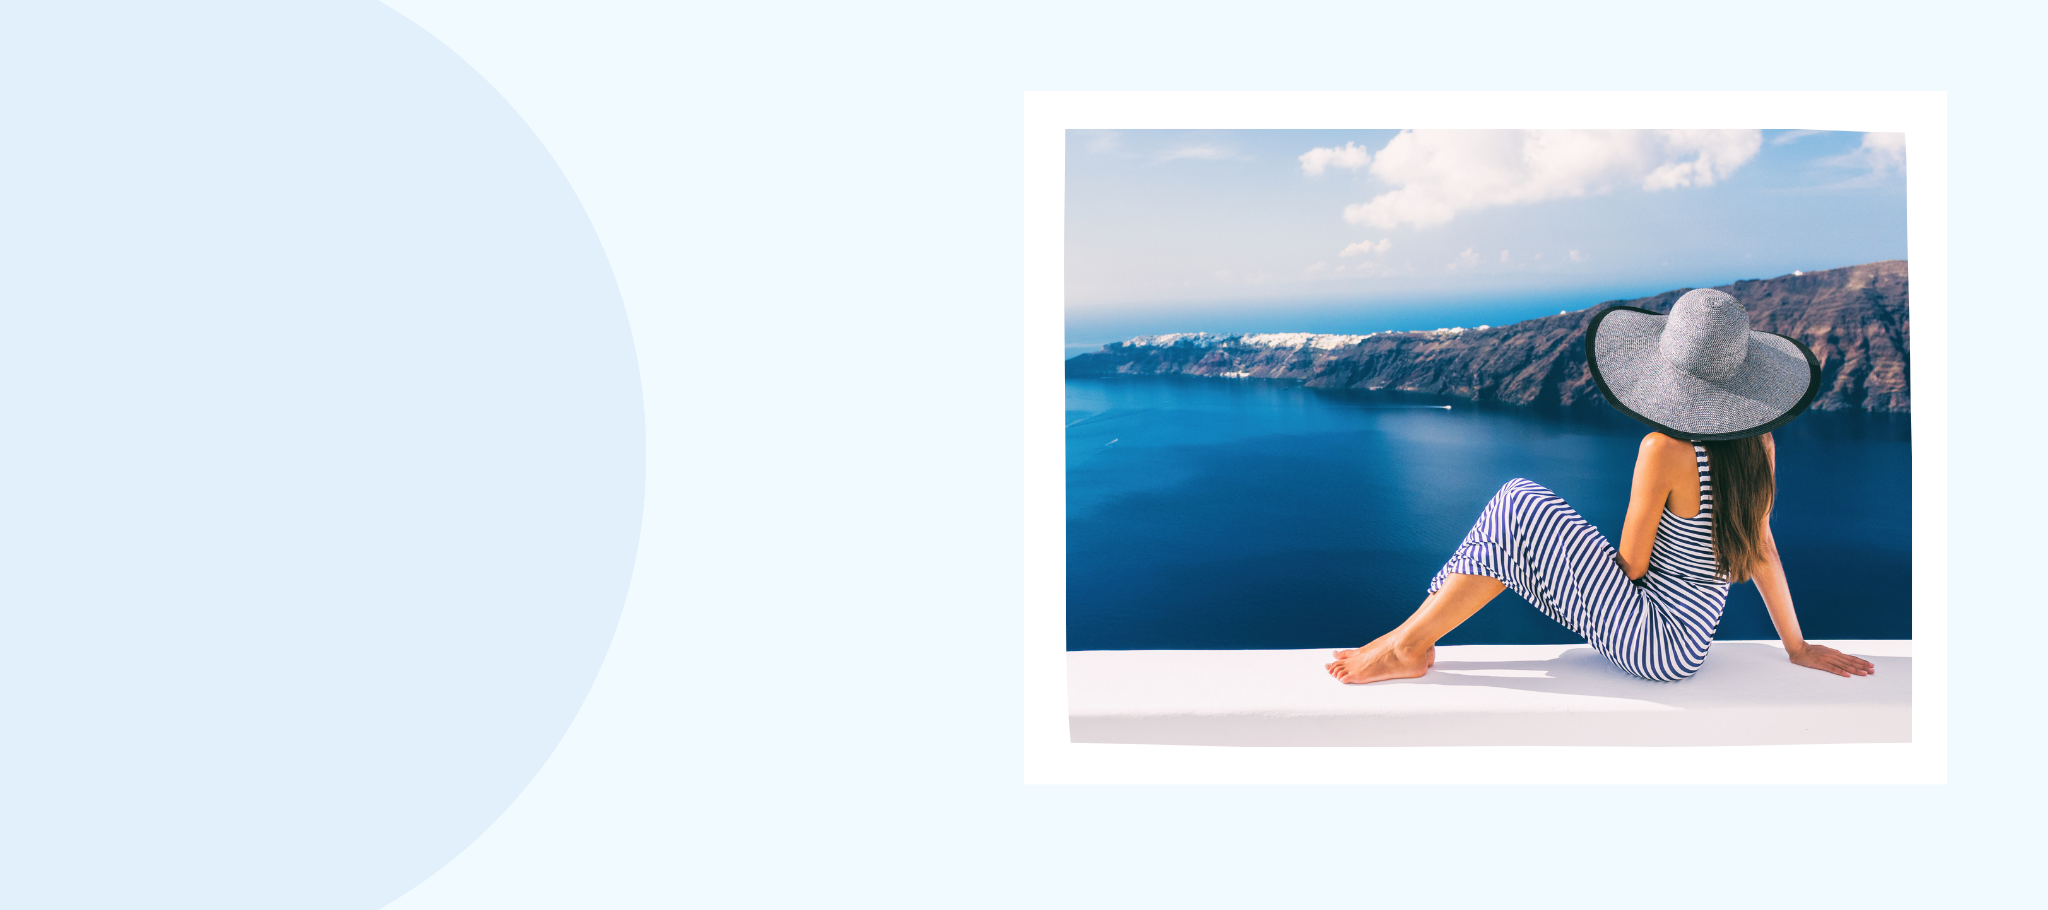 Home page banner image for travel health service. Woman sitting on wall looking out at the ocean